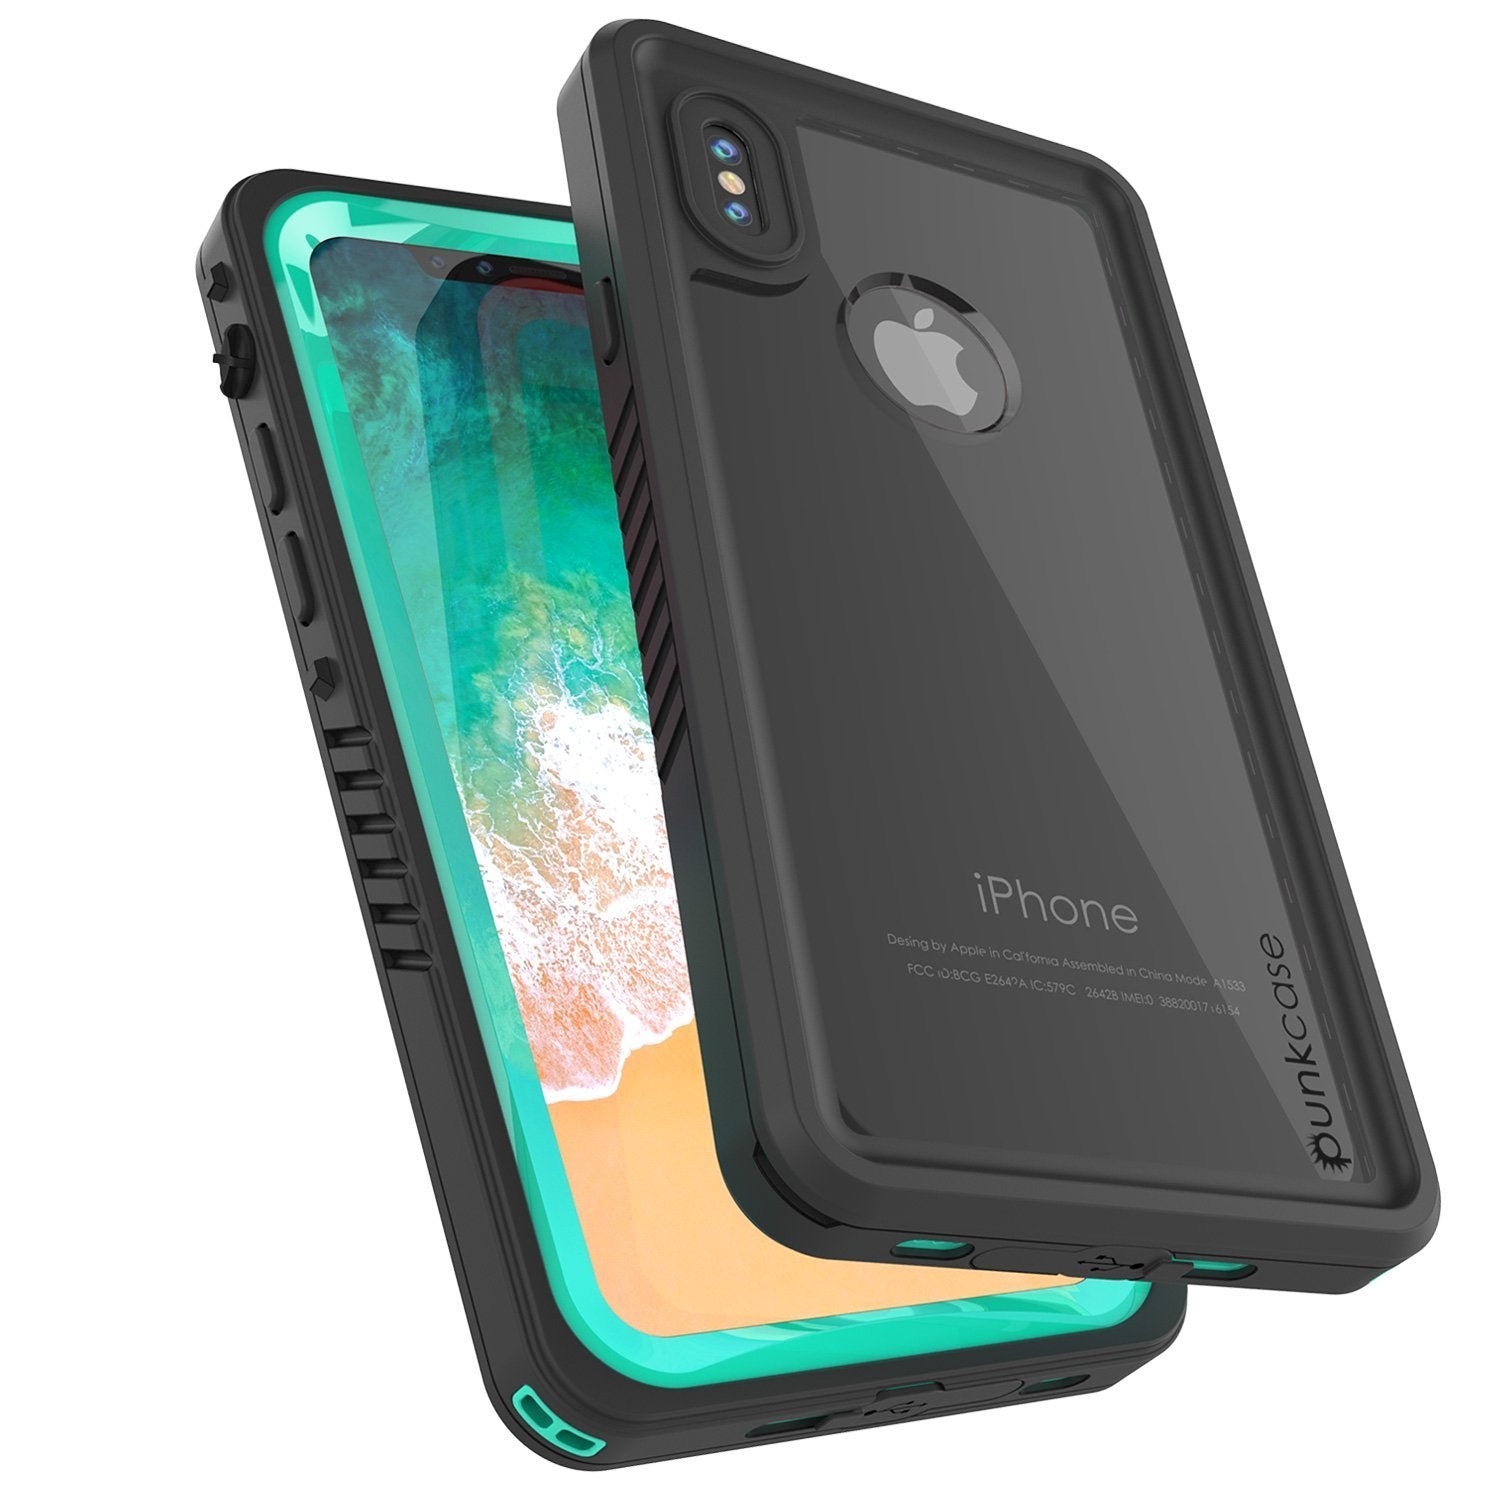 iPhone XS Max Waterproof Case, Punkcase [Extreme Series] Armor Cover W/ Built In Screen Protector [Teal]